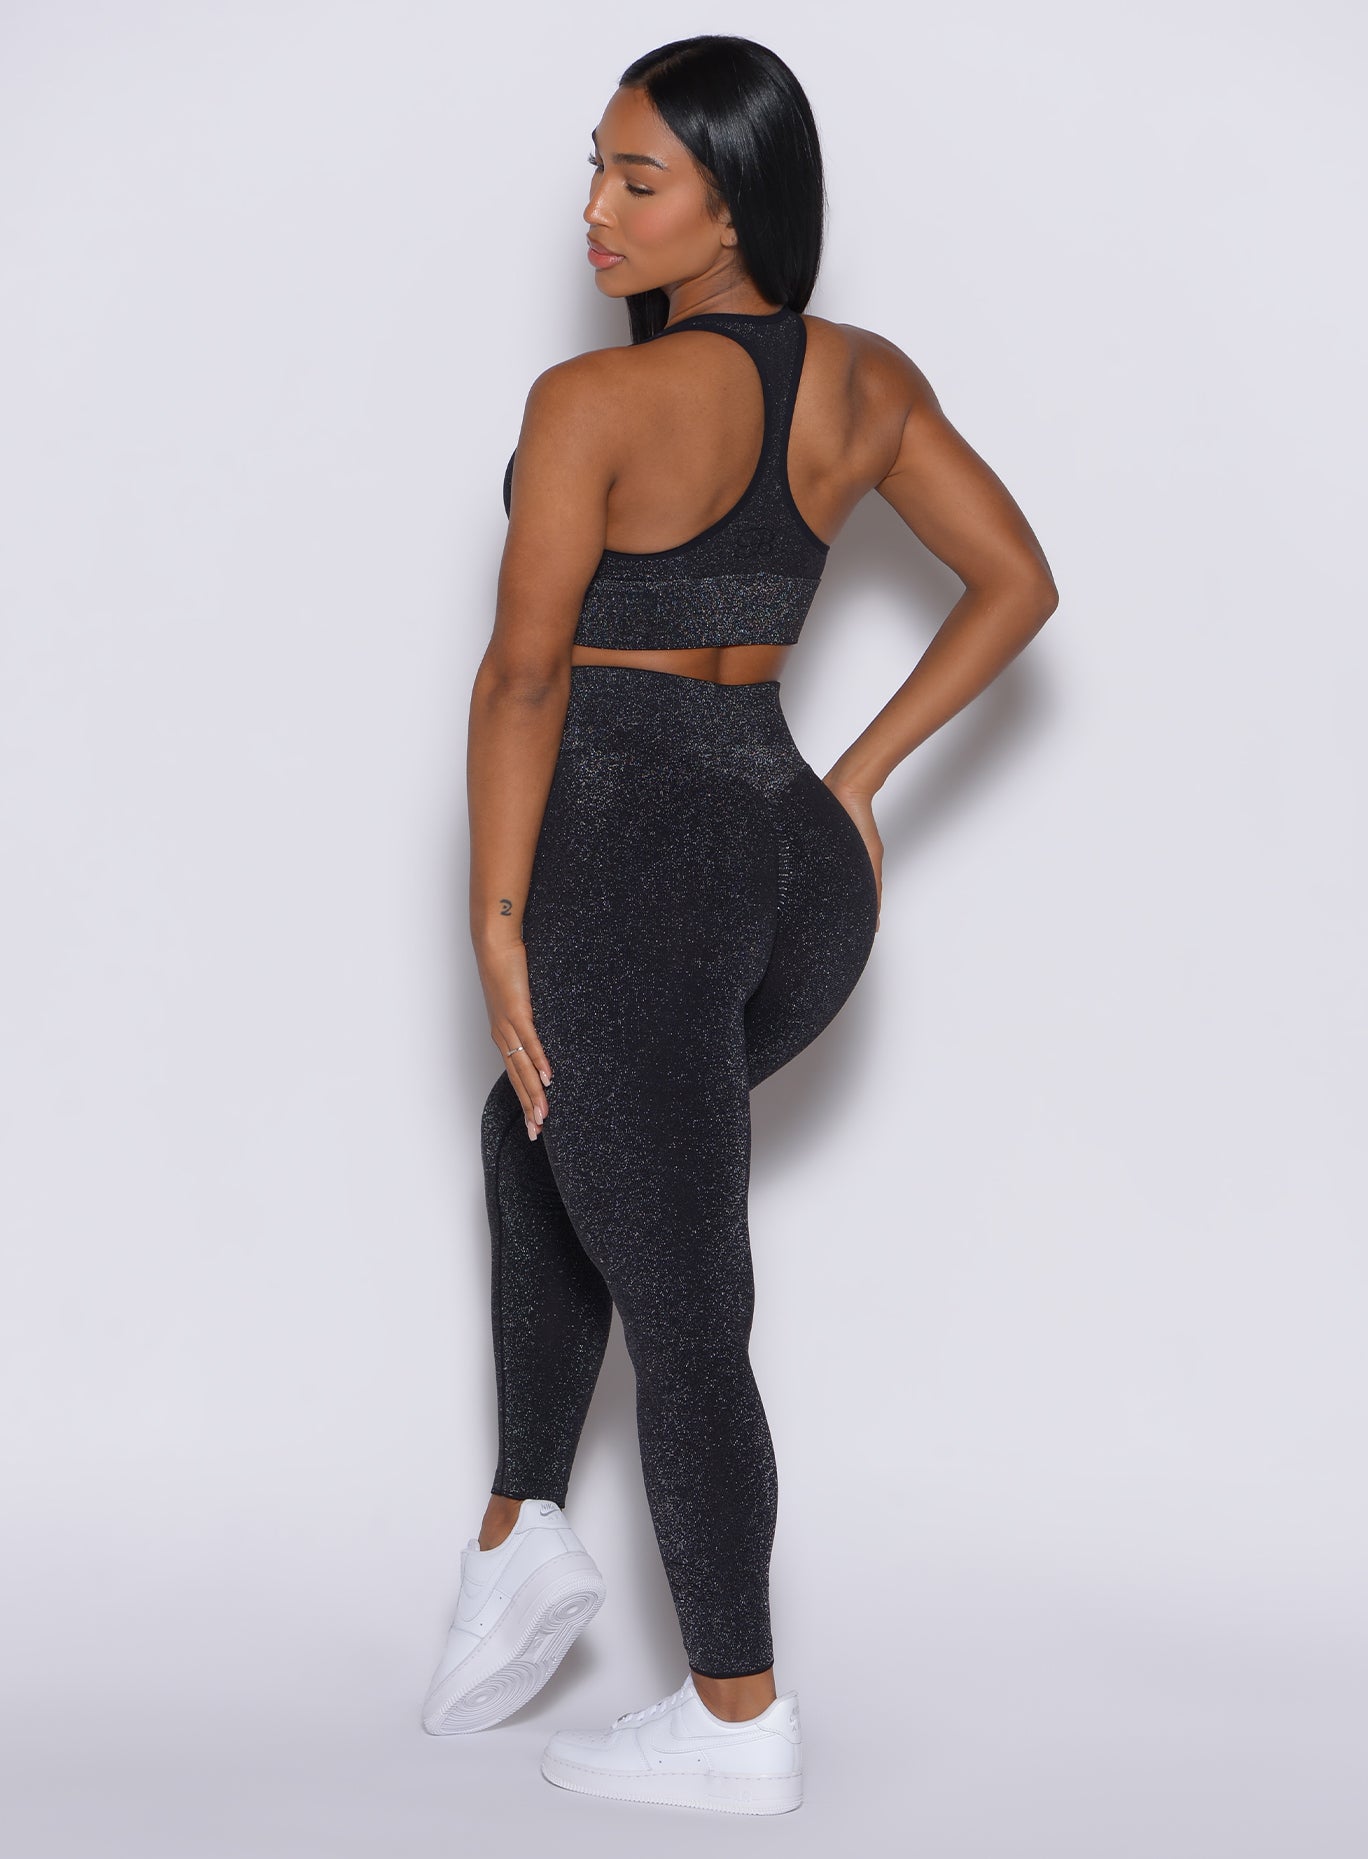 back  side profile view of a model wearing our Shimmer Seamless Leggings in black sparkle color along with the matching shimmer bra